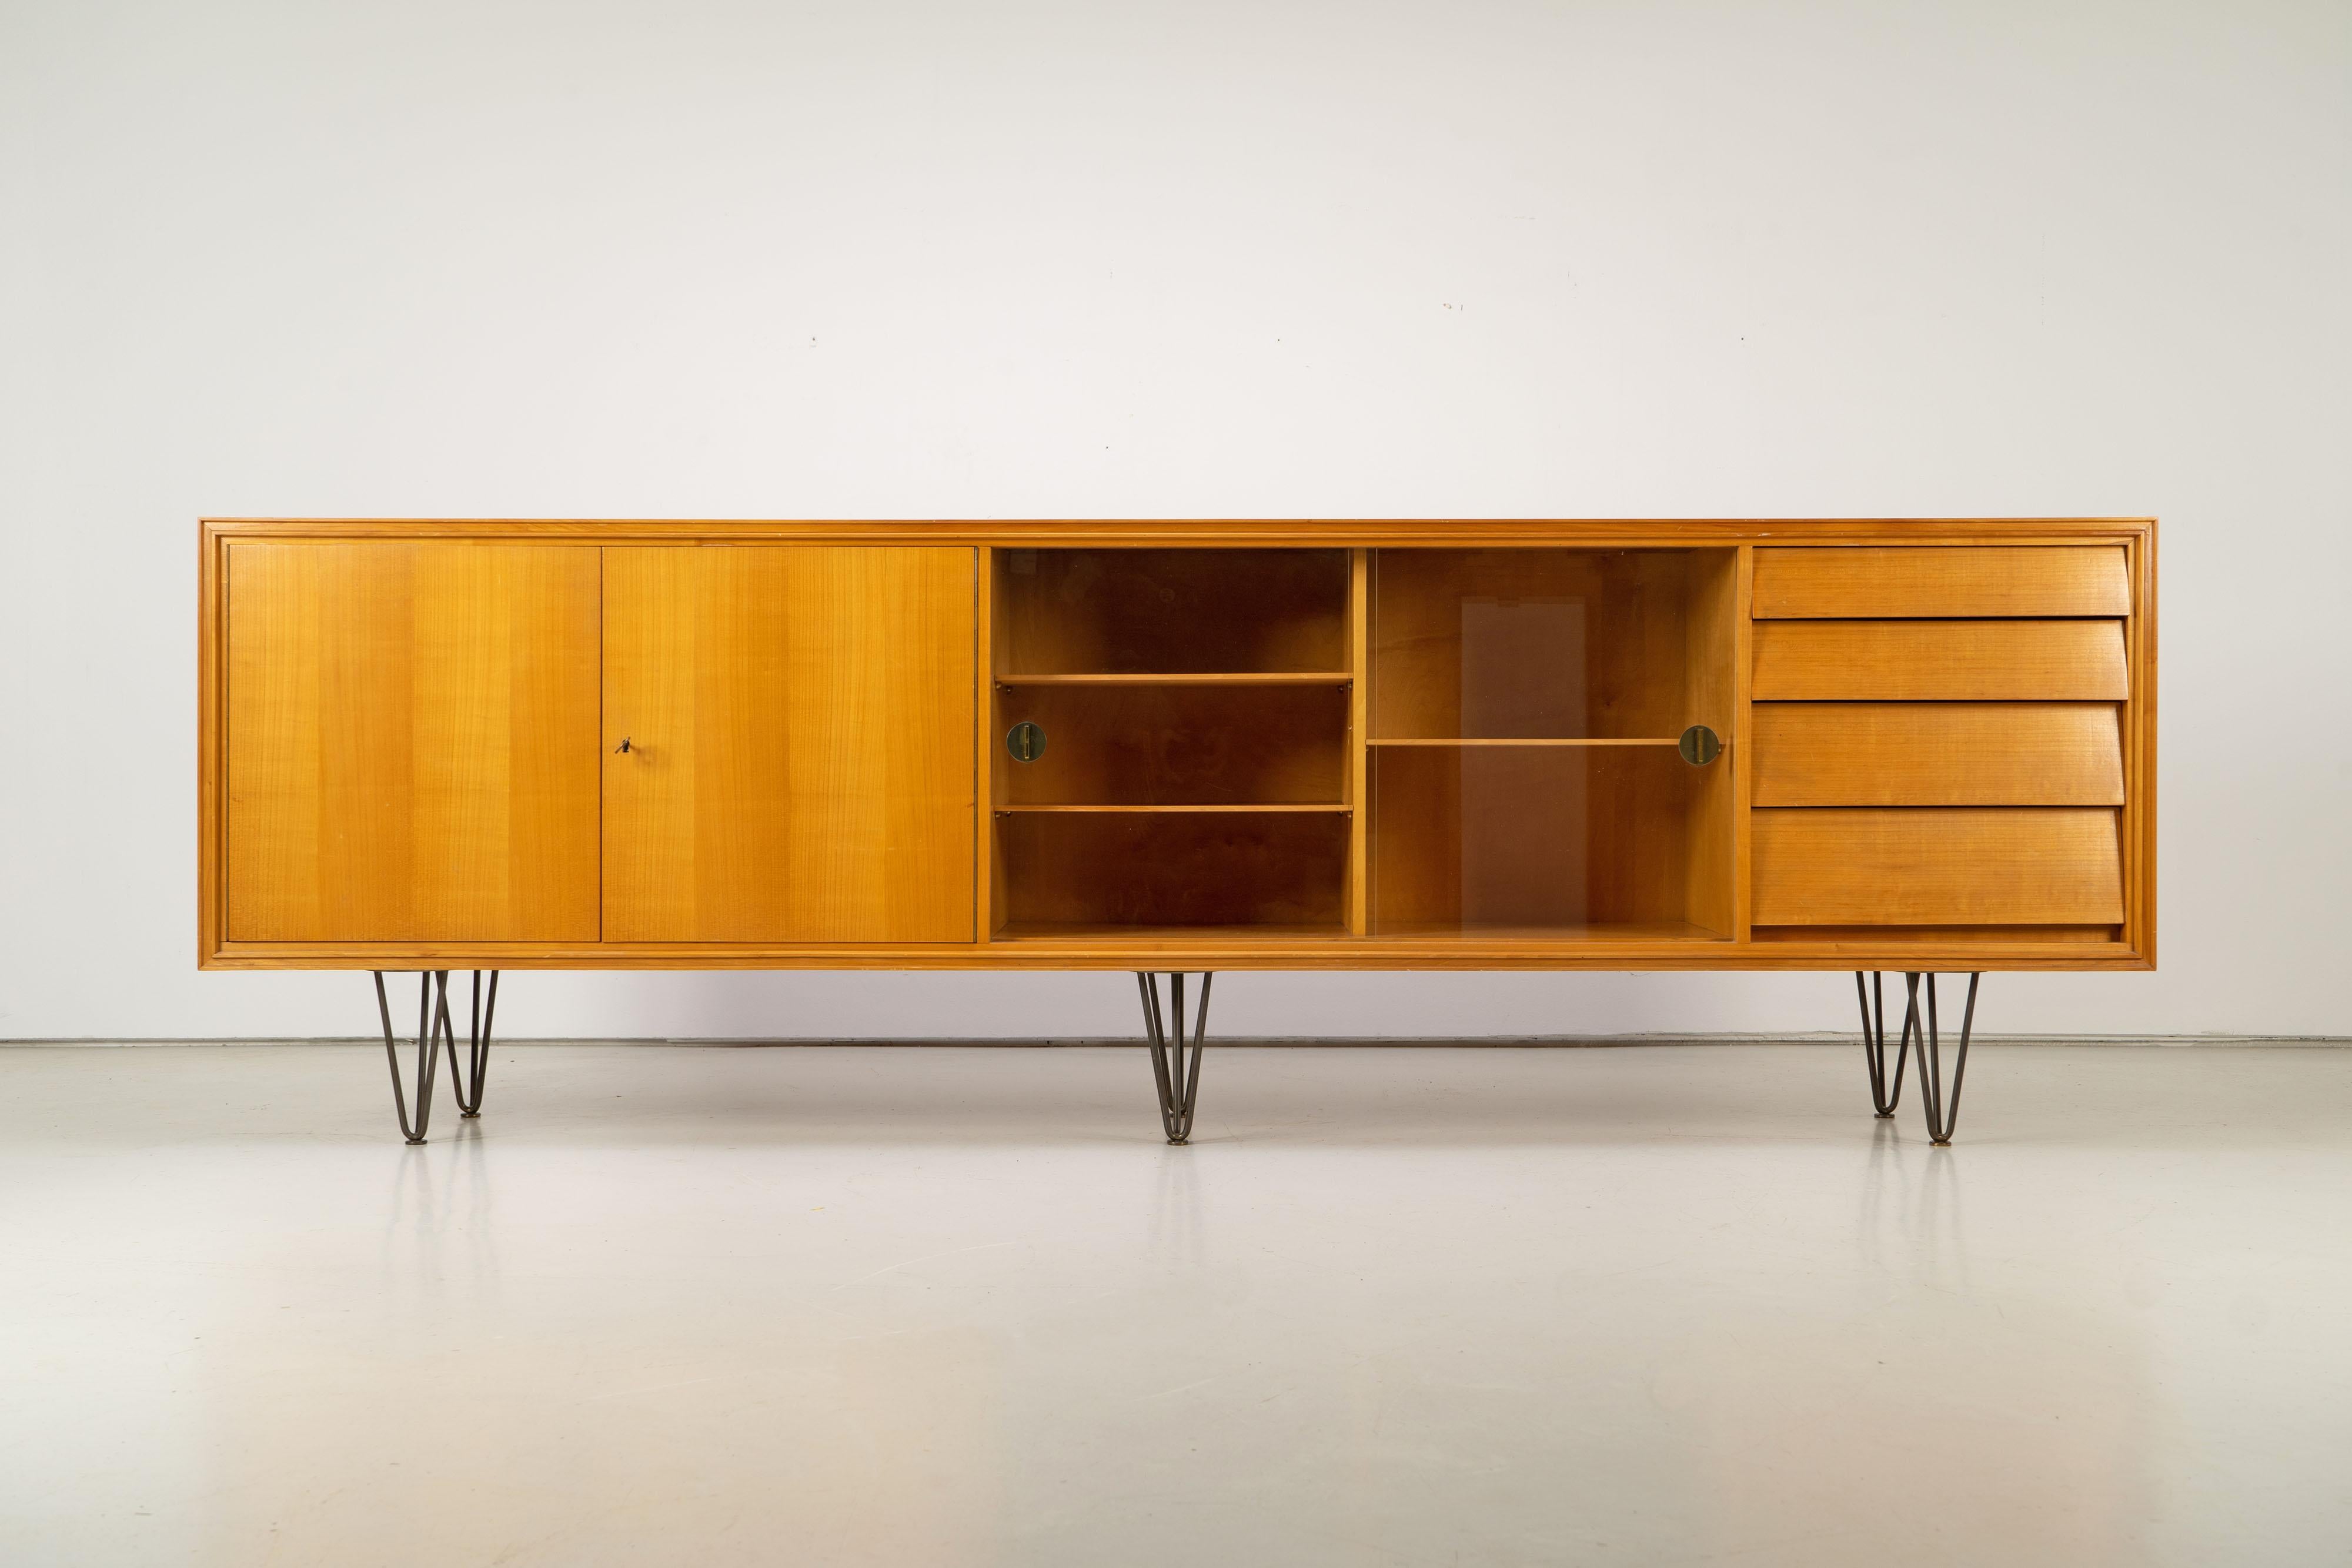 Great sideboard in the style of Alfred Altherr from the 1950s. The furniture is in excellent orriginal condition with original hairpin feet and handles made of brass. The surfaces are veneered with ash wood.